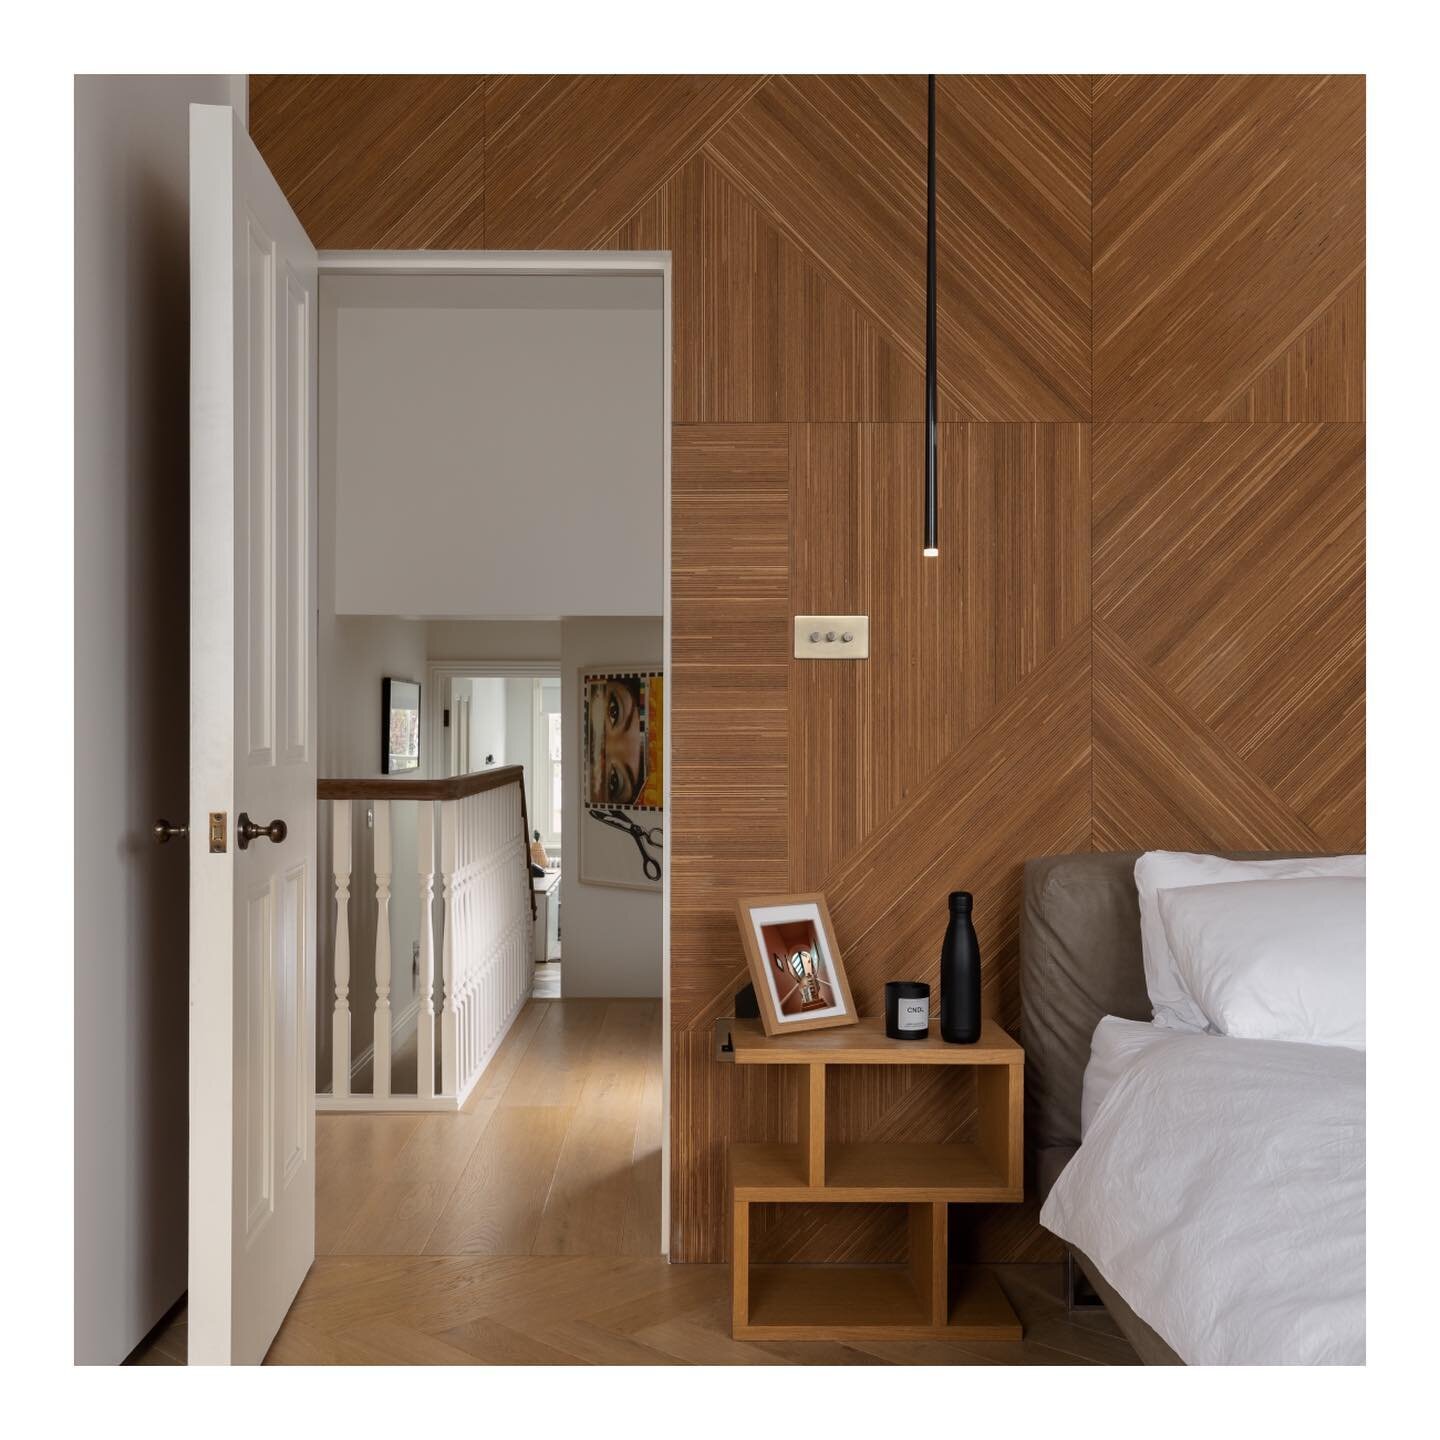 【Door in a Wall - Brockley, SE4】
Temza pulled off some really refined designs in this Brockley semi-detached refurbishment. The material used in this feature bedroom wall is made by @plexwood and comes in various patterns and configurations. I really